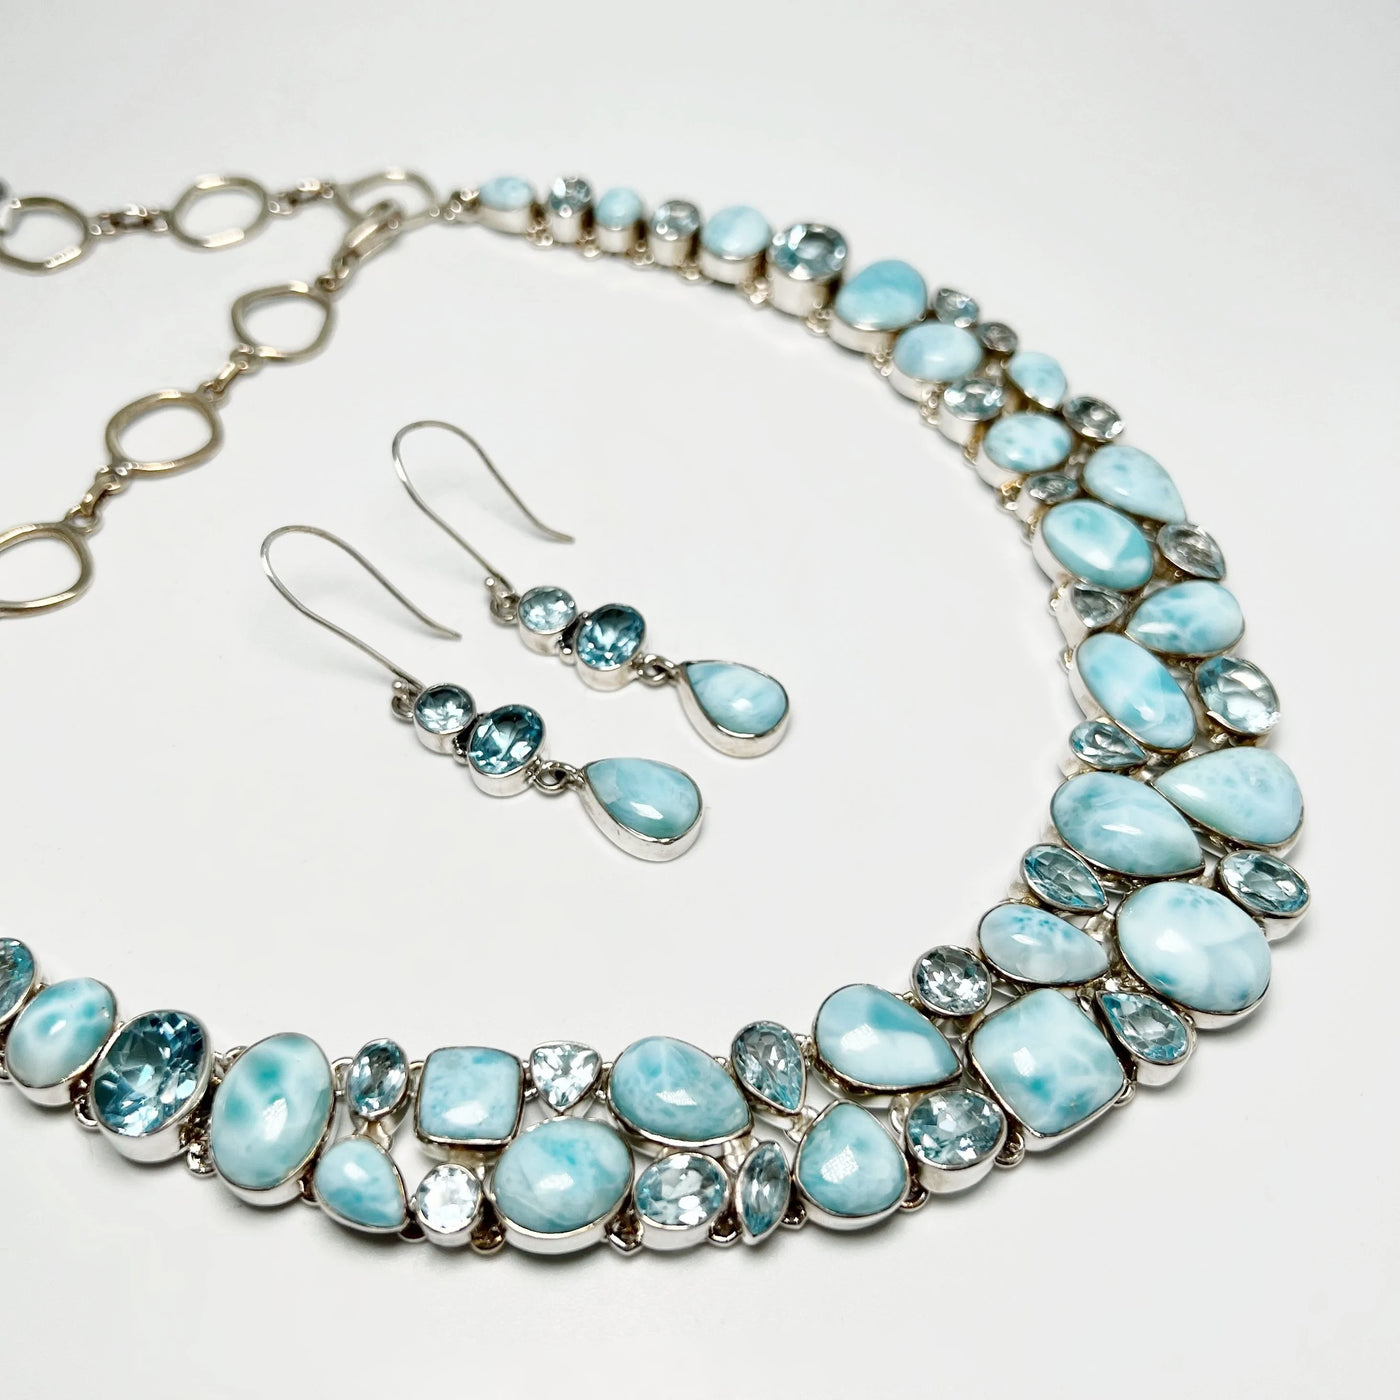 Larimar and Blue Topaz Necklace and Earrings Set